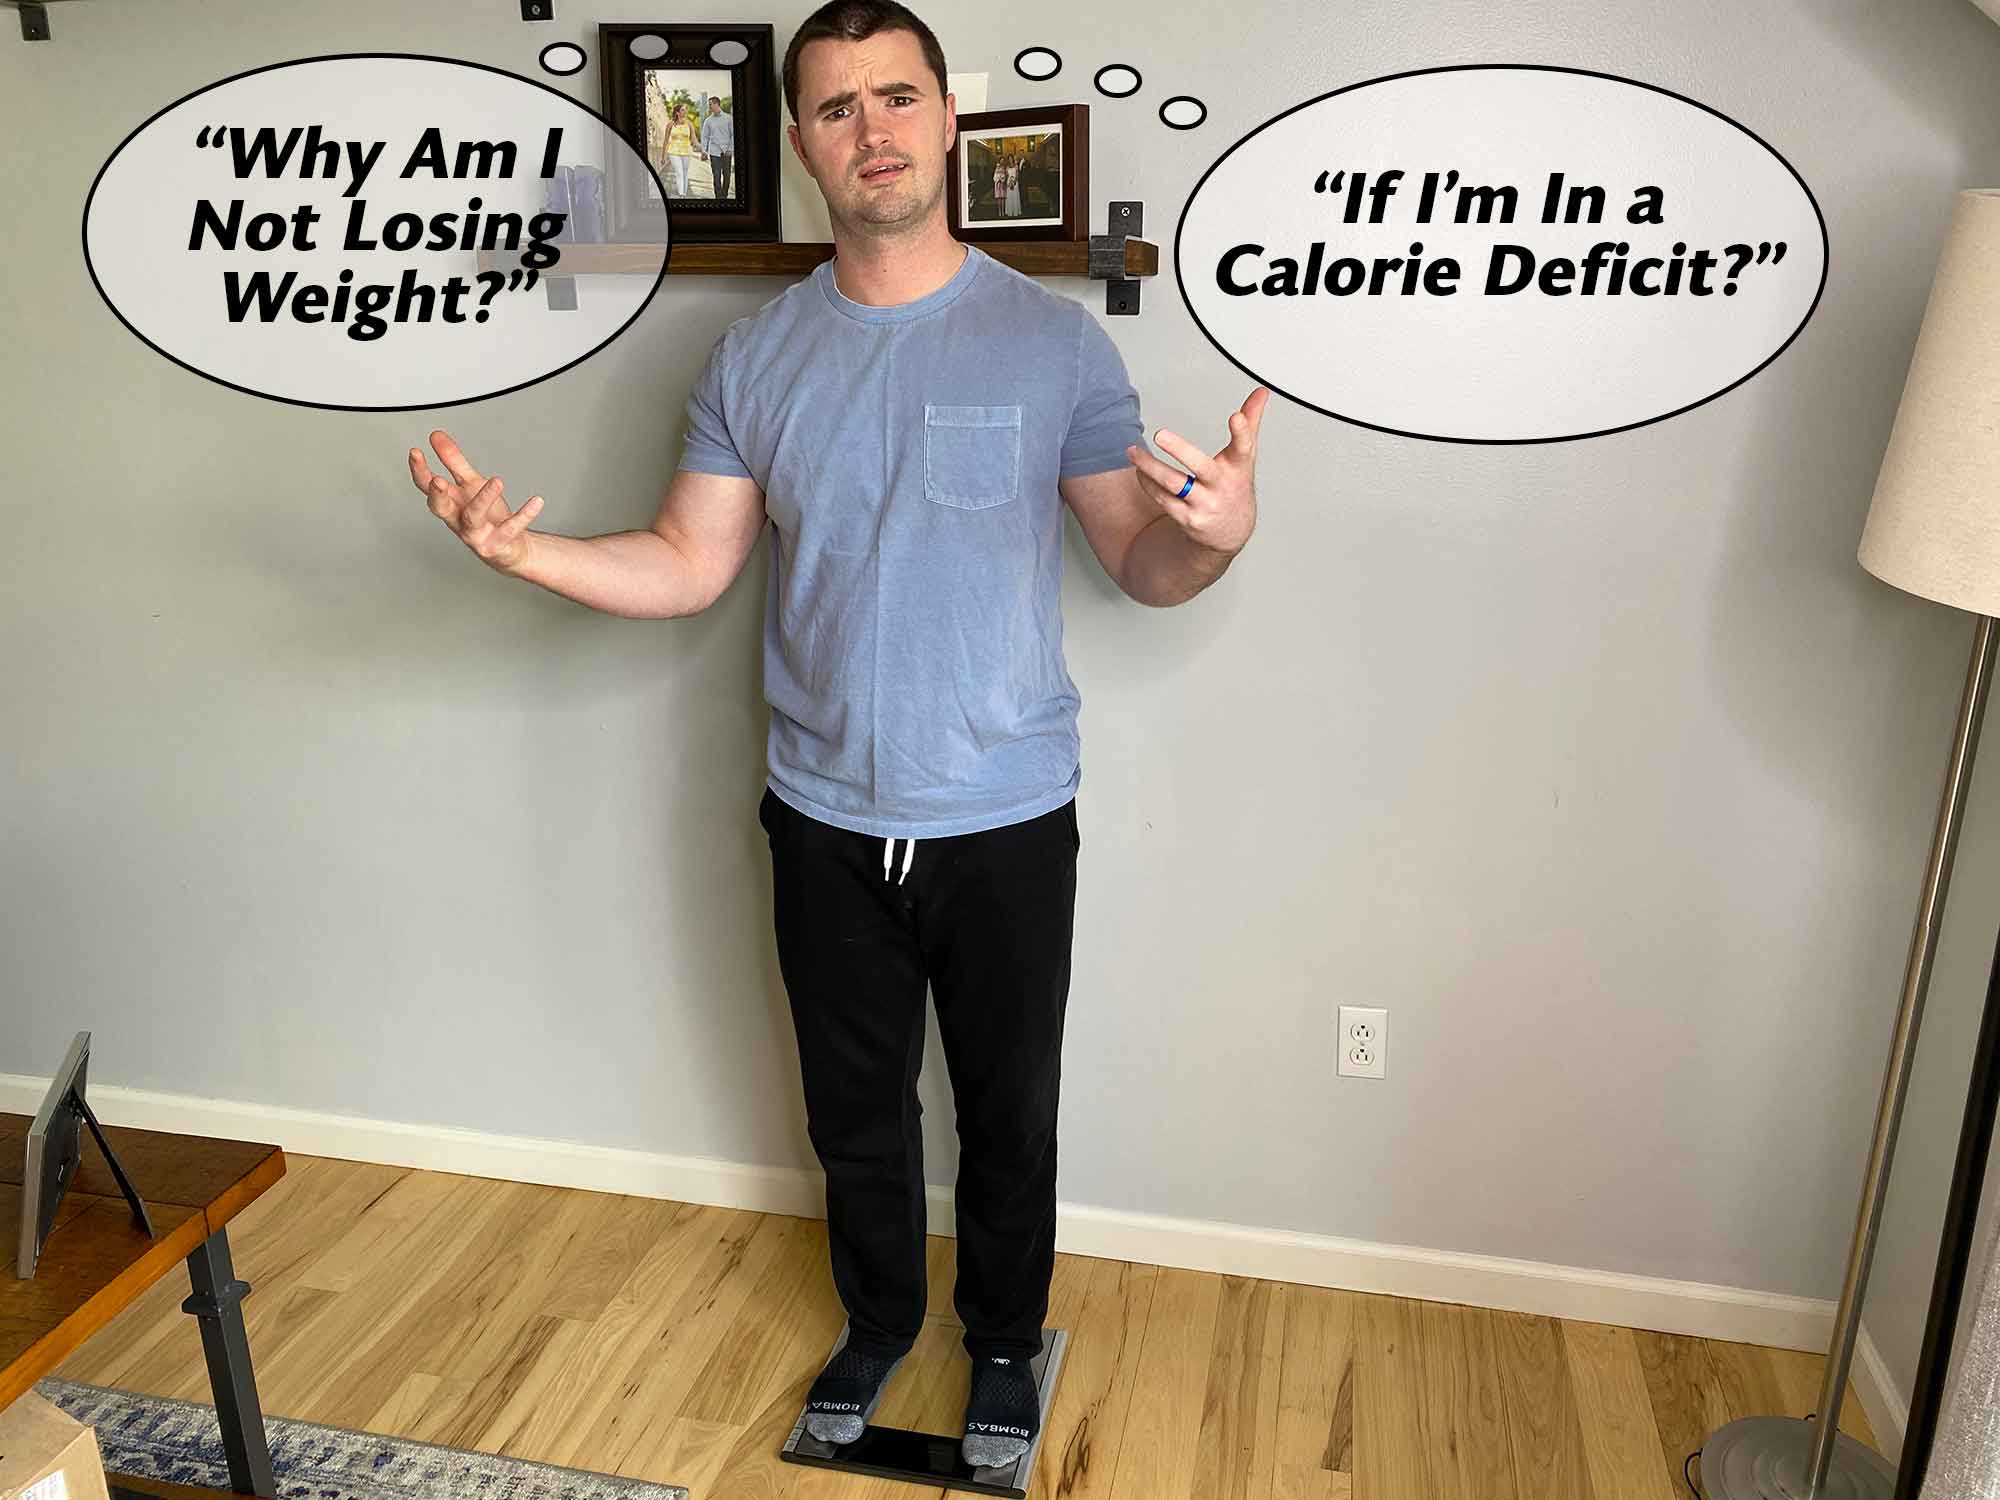 Why Am I Not Losing Weight in a Calorie Deficit?